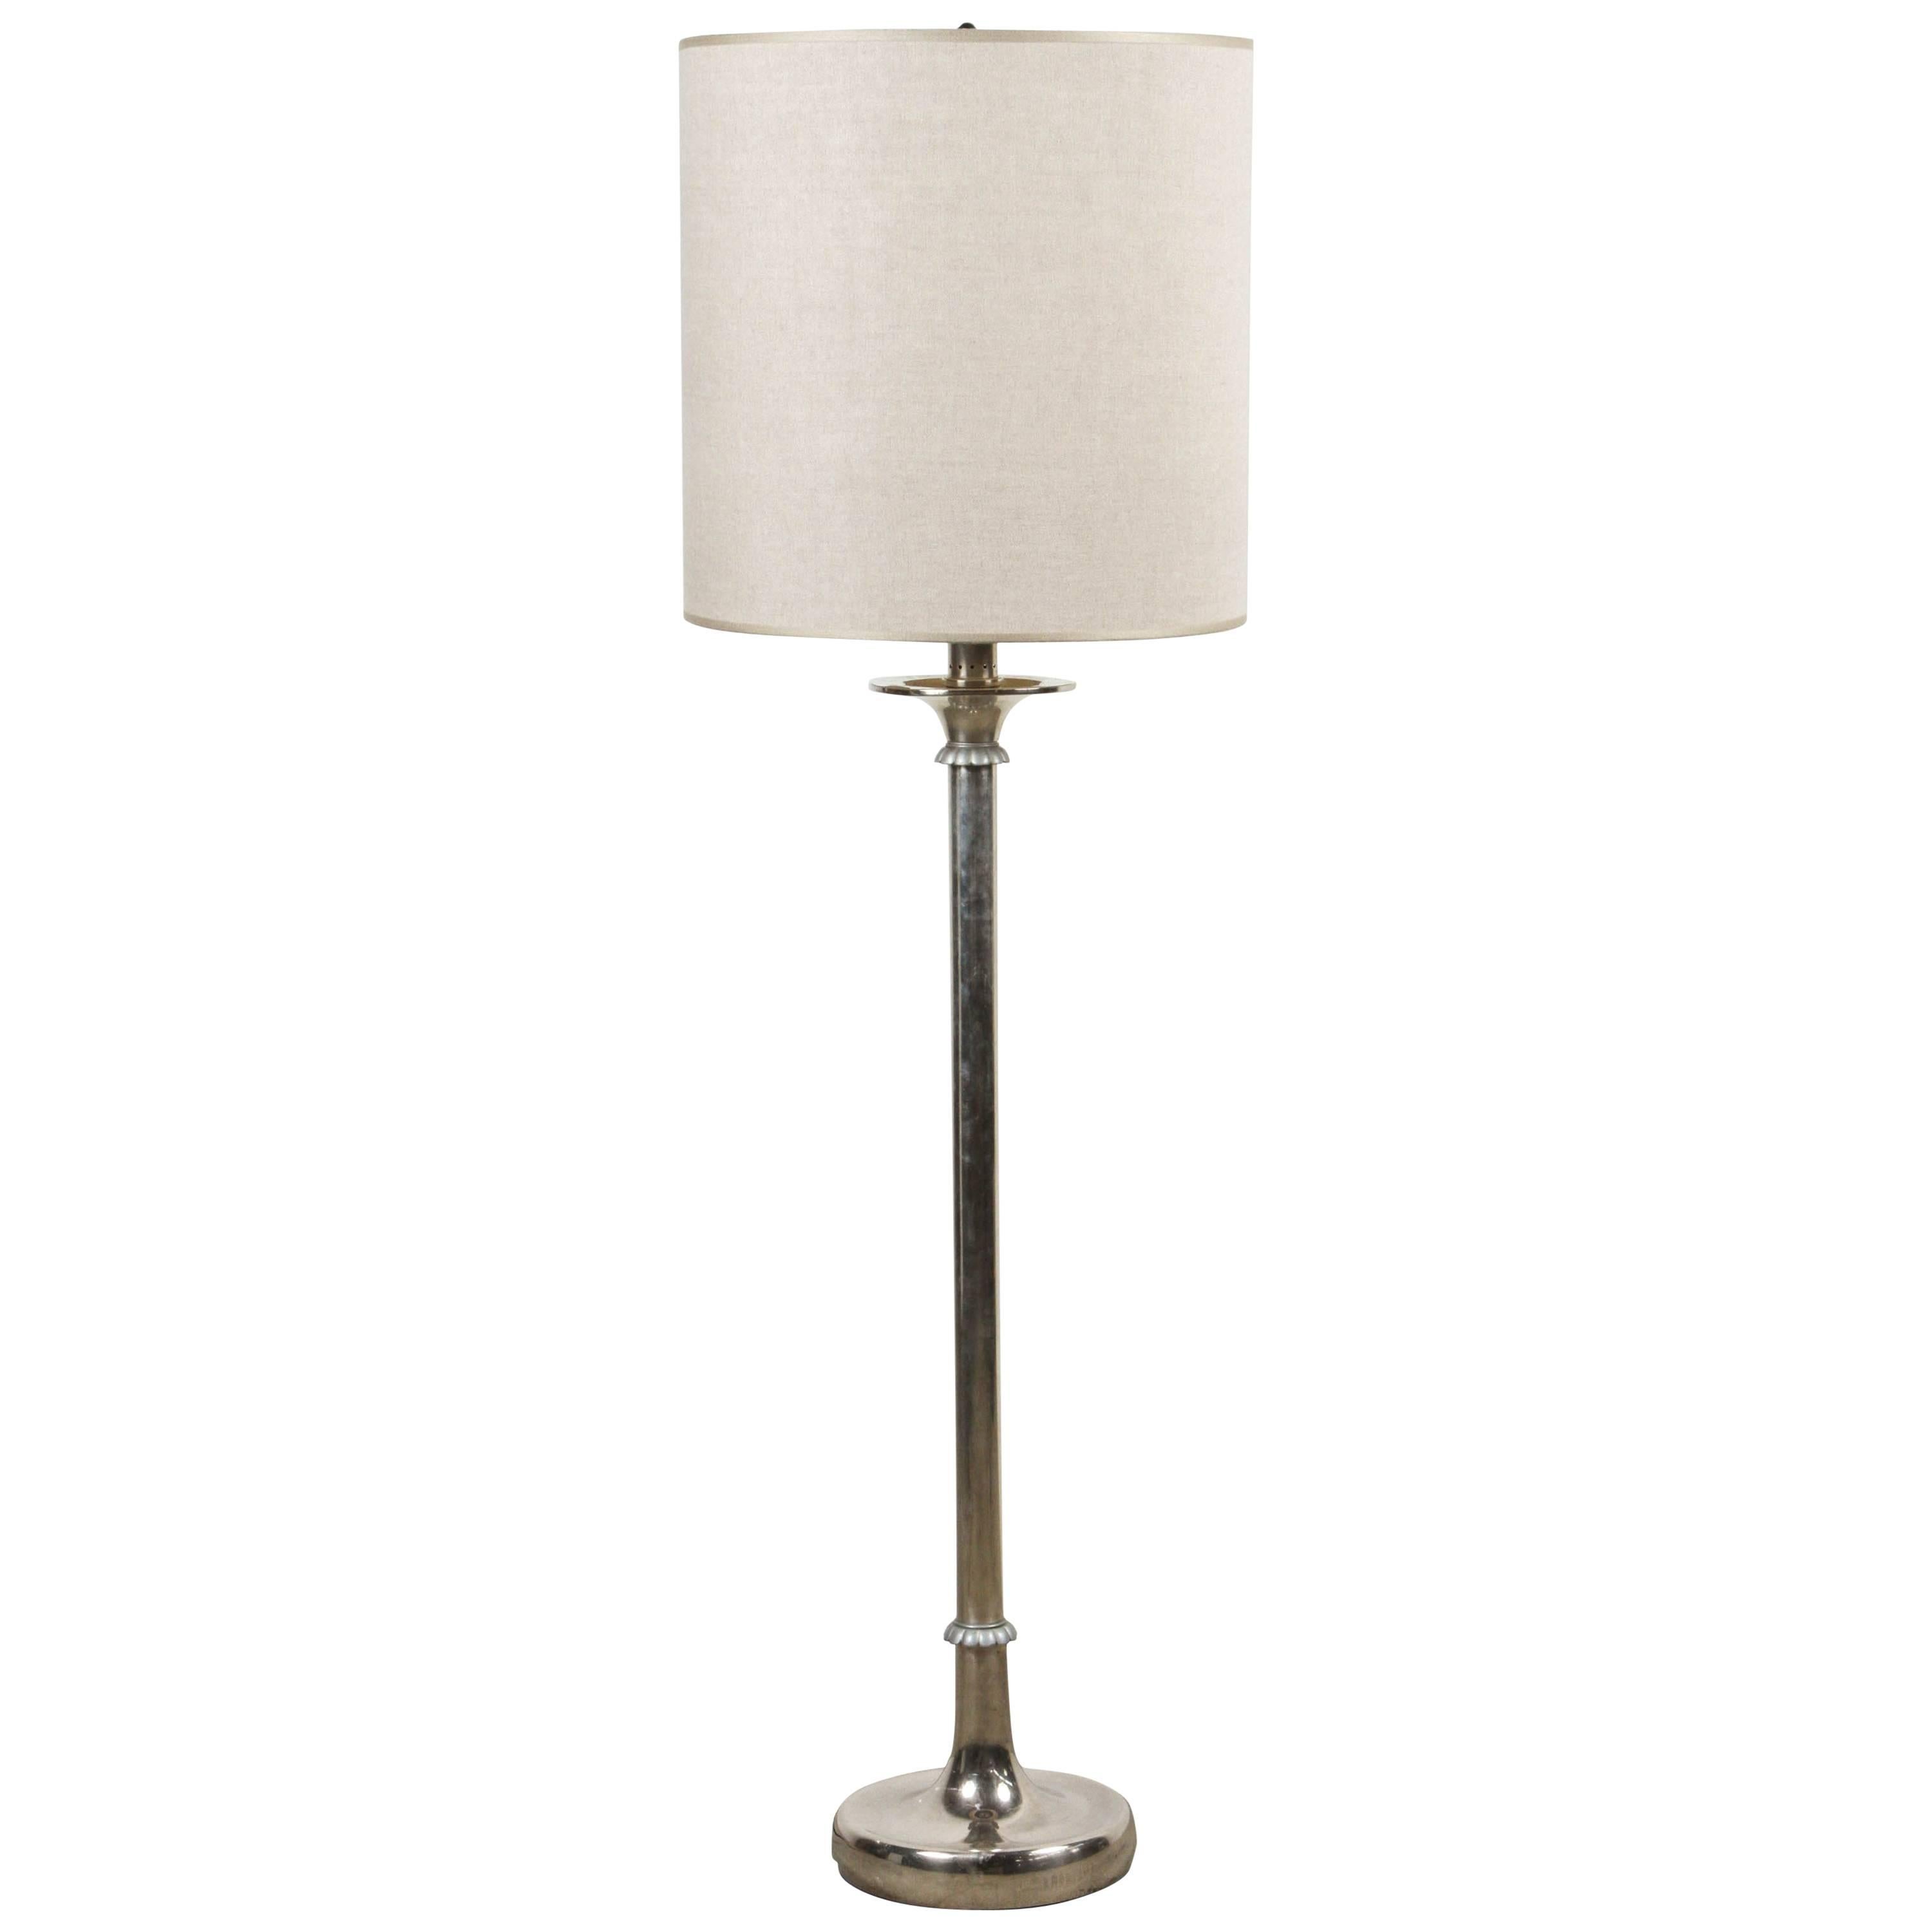 Italian Silver Floor Lamp with Flower Detail and an Oversized Lamp Shade